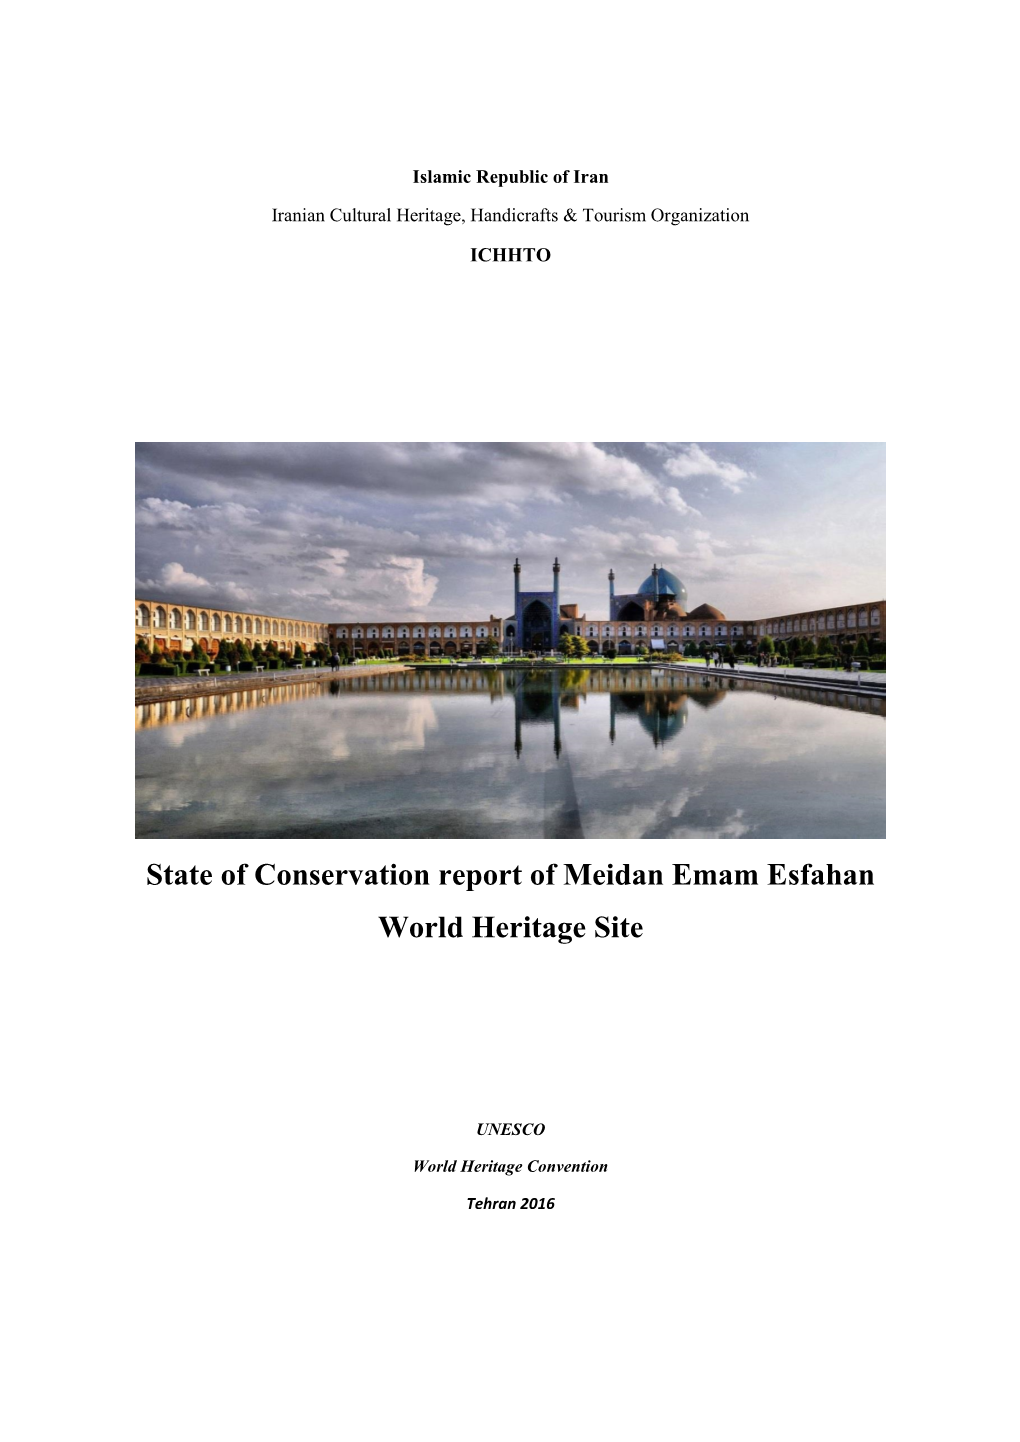 State of Conservation Report of Meidan Emam Esfahan World Heritage Site